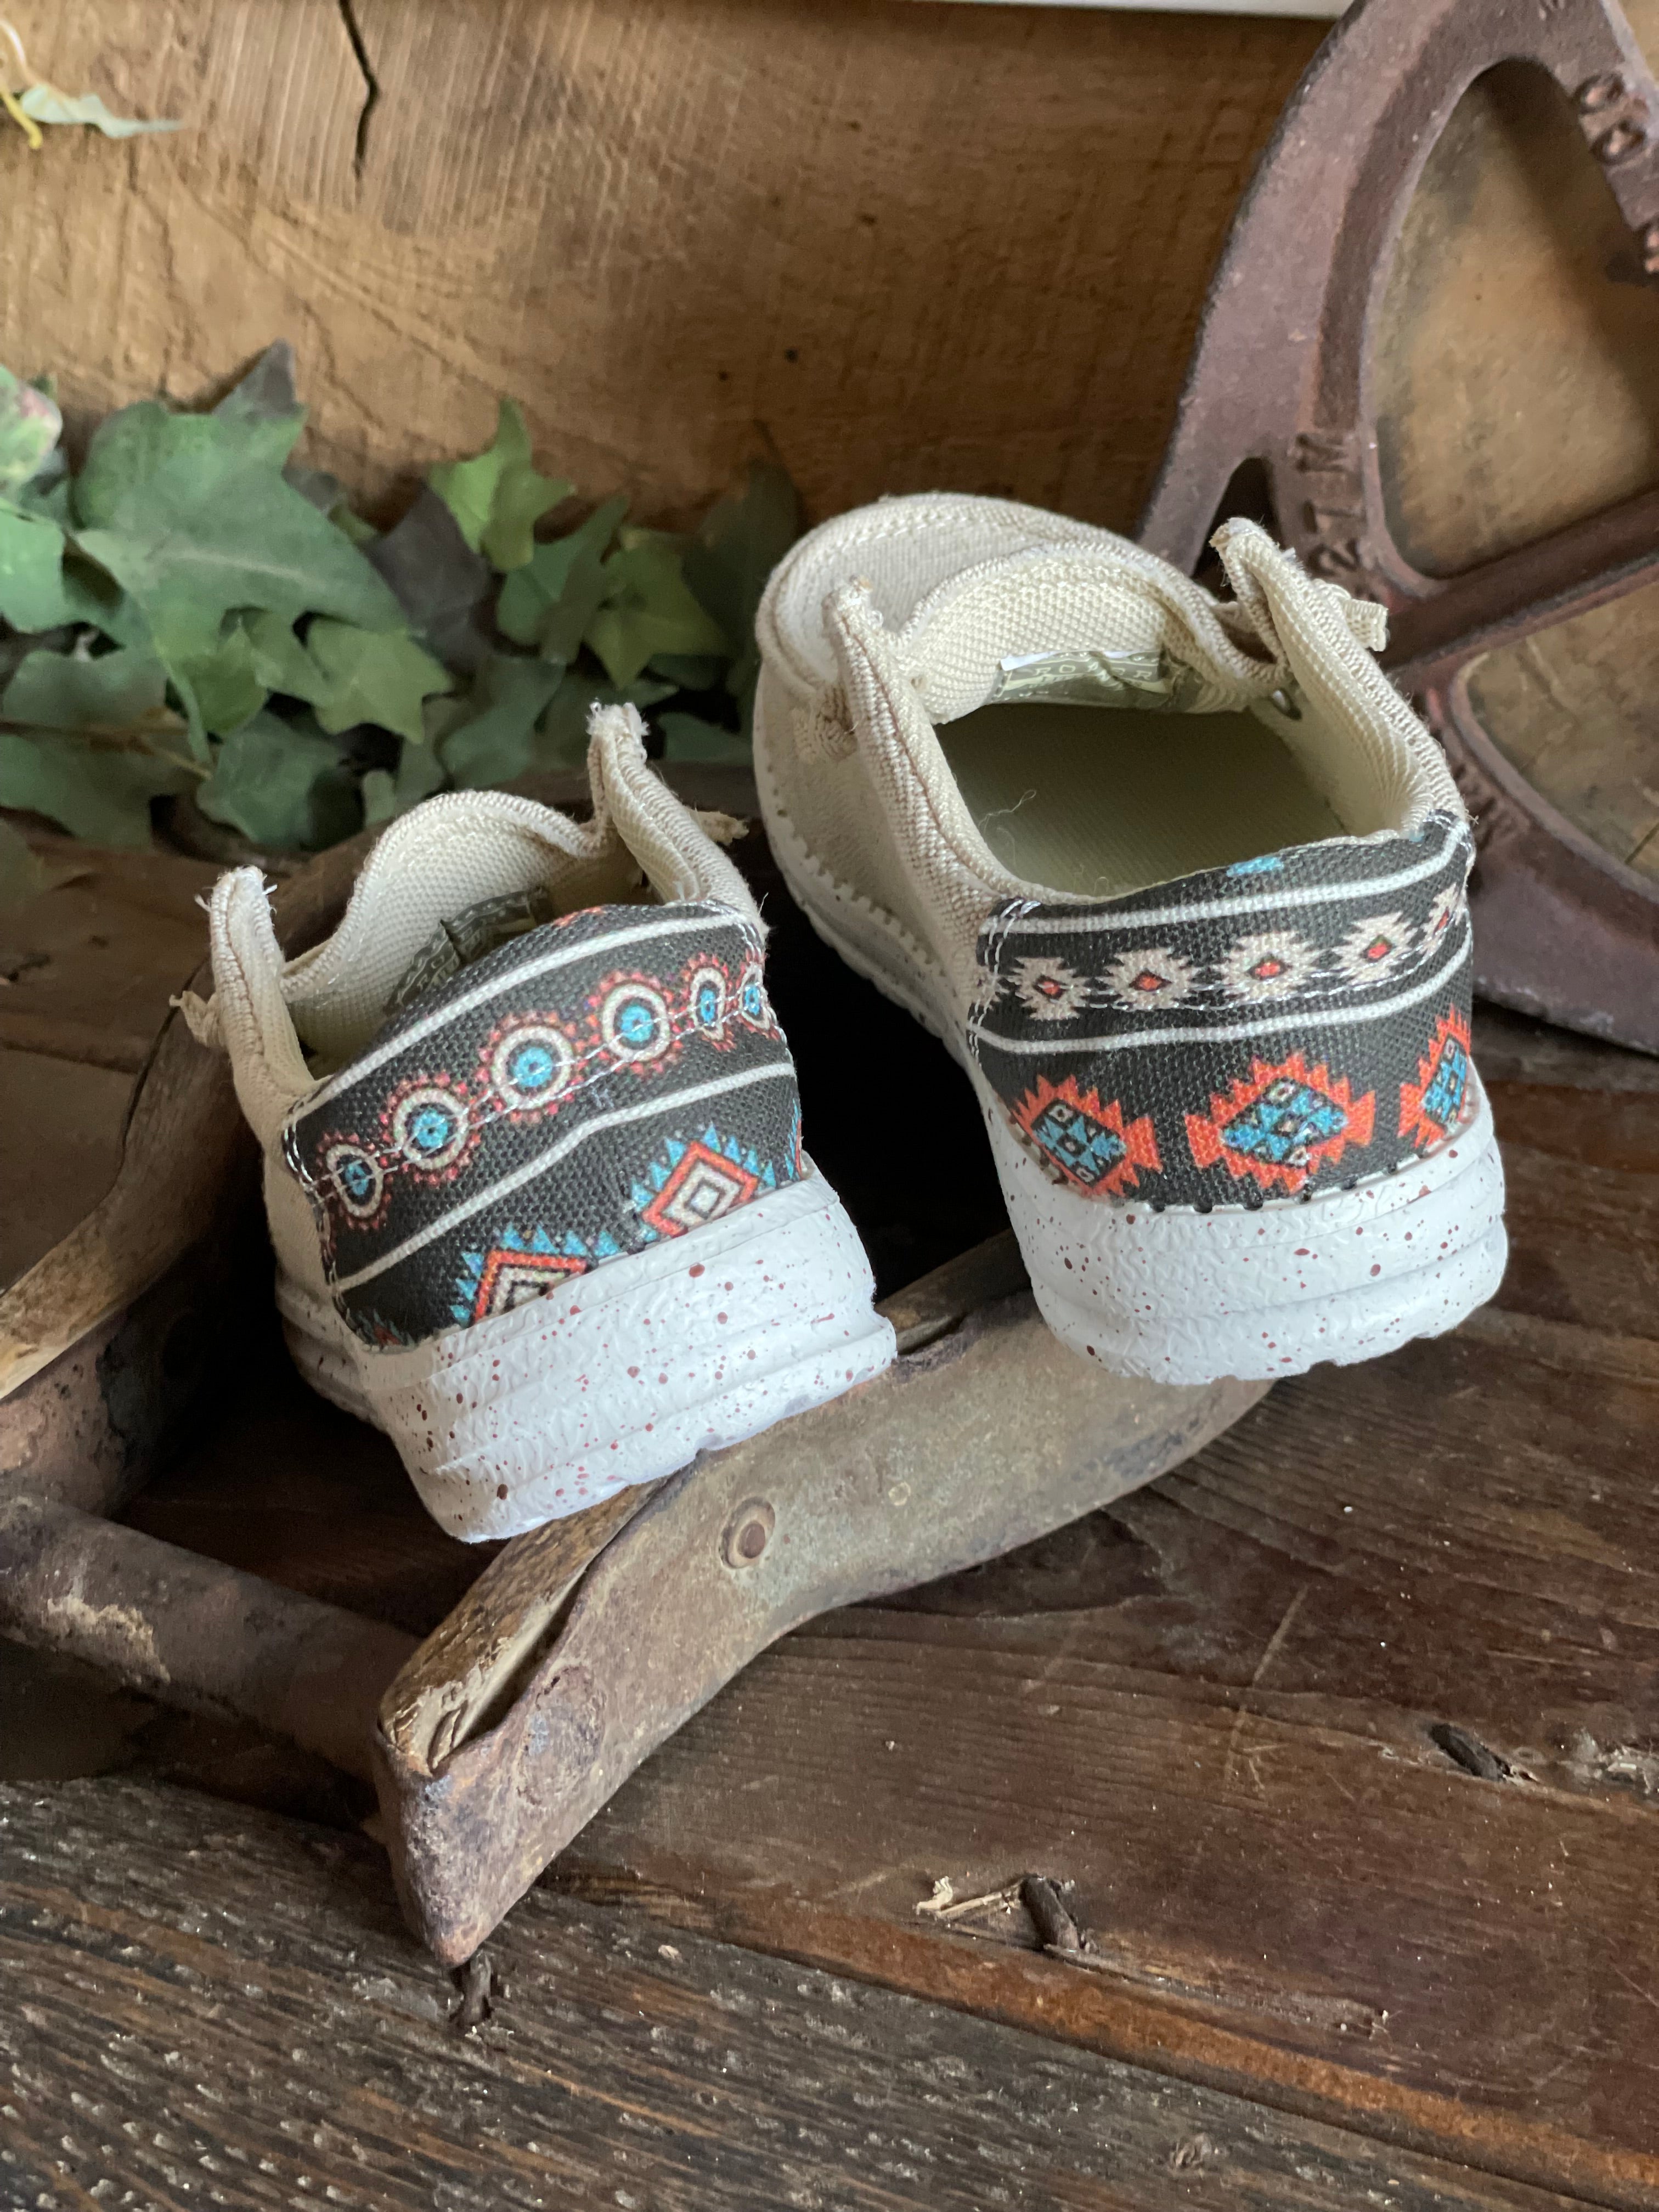 Little Kids Roper Hang Loose Sneaker in Tan-Kids Casual Shoes-Roper-Lucky J Boots & More, Women's, Men's, & Kids Western Store Located in Carthage, MO